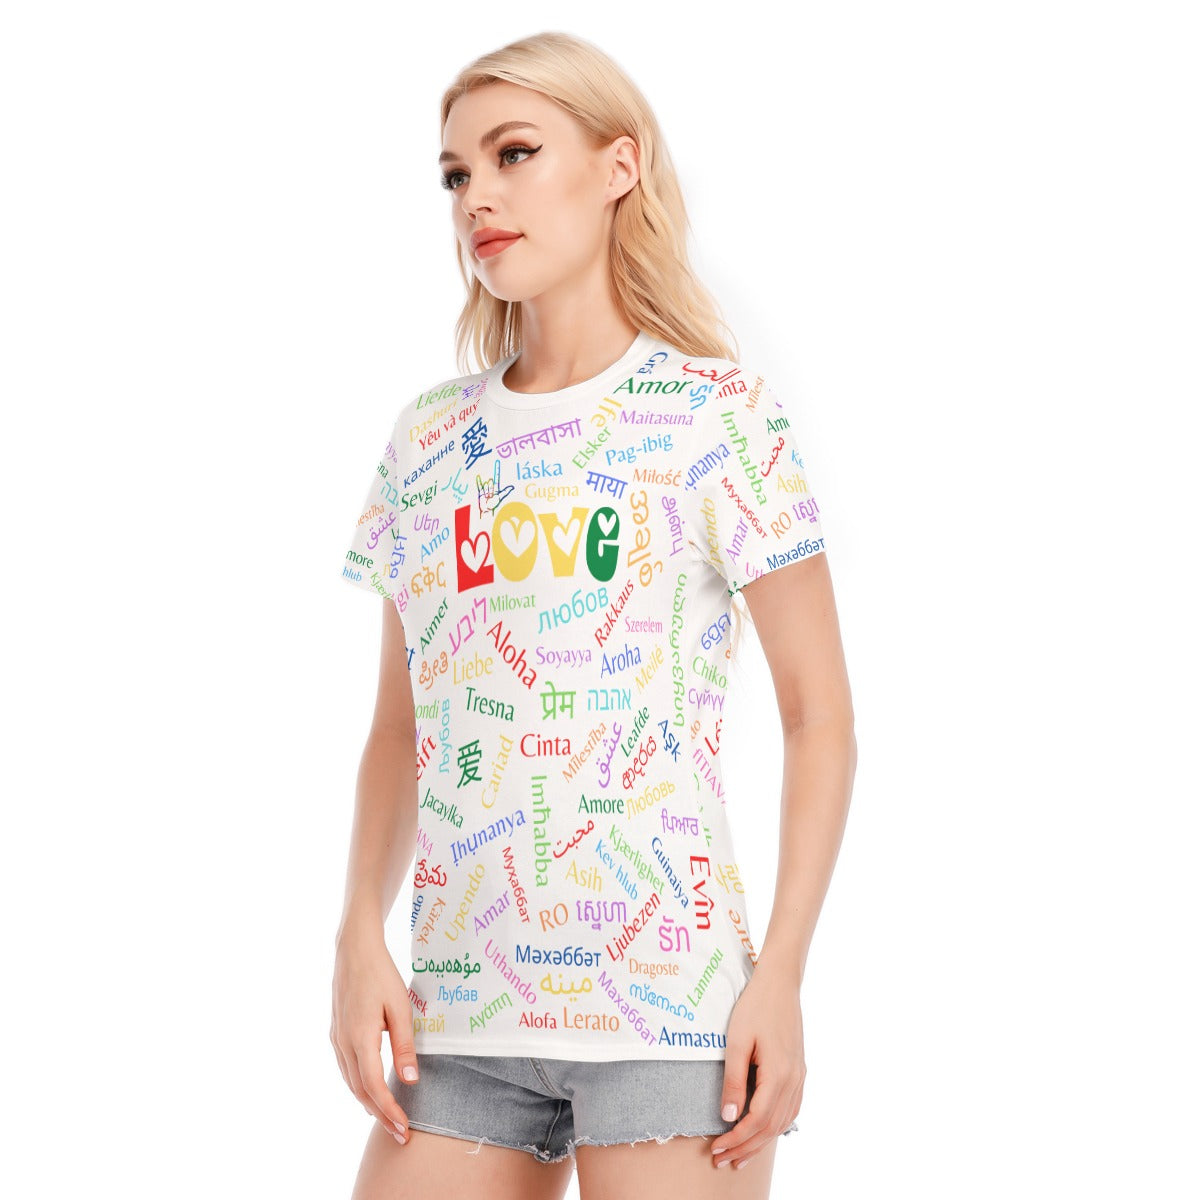 Women's 100% Cotton "LOVE" Crew Neck T-Shirt - Grooves Fashion and Footwear